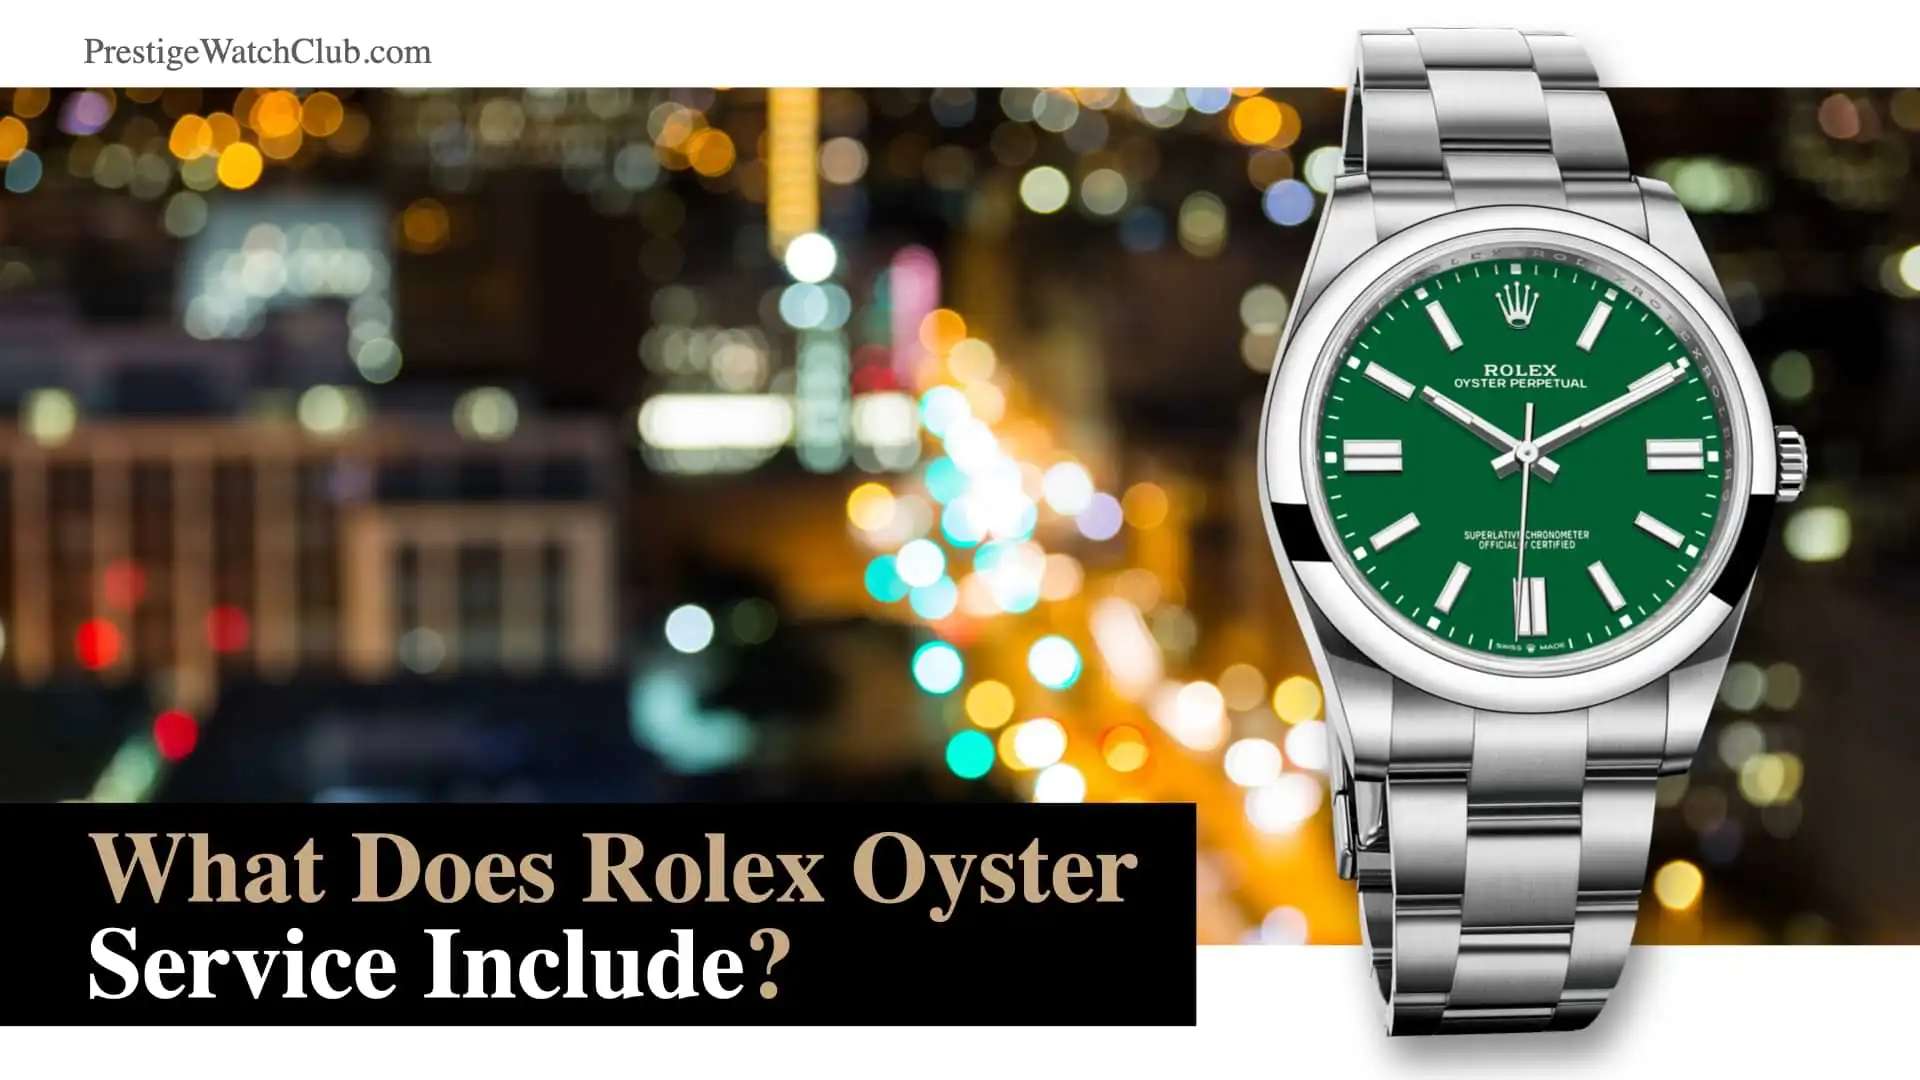 What Does A Rolex Service Include For The Oyster Perpetual?